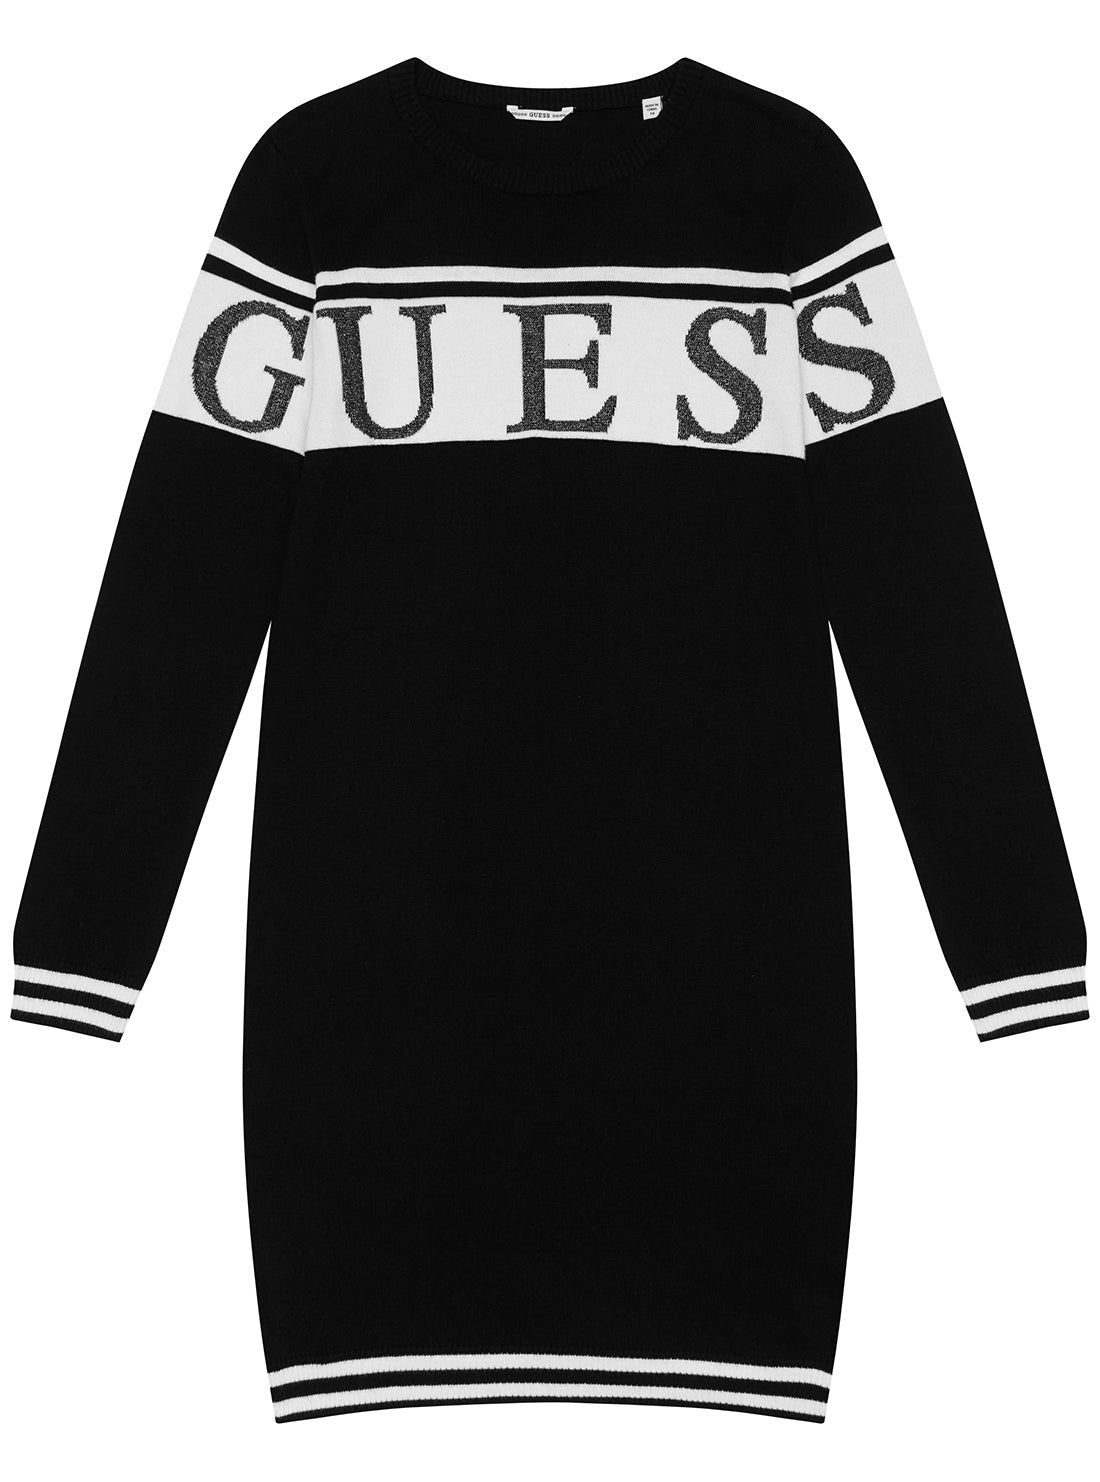 GUESS Black Long Sleeve Knit Dress (7-16) front view